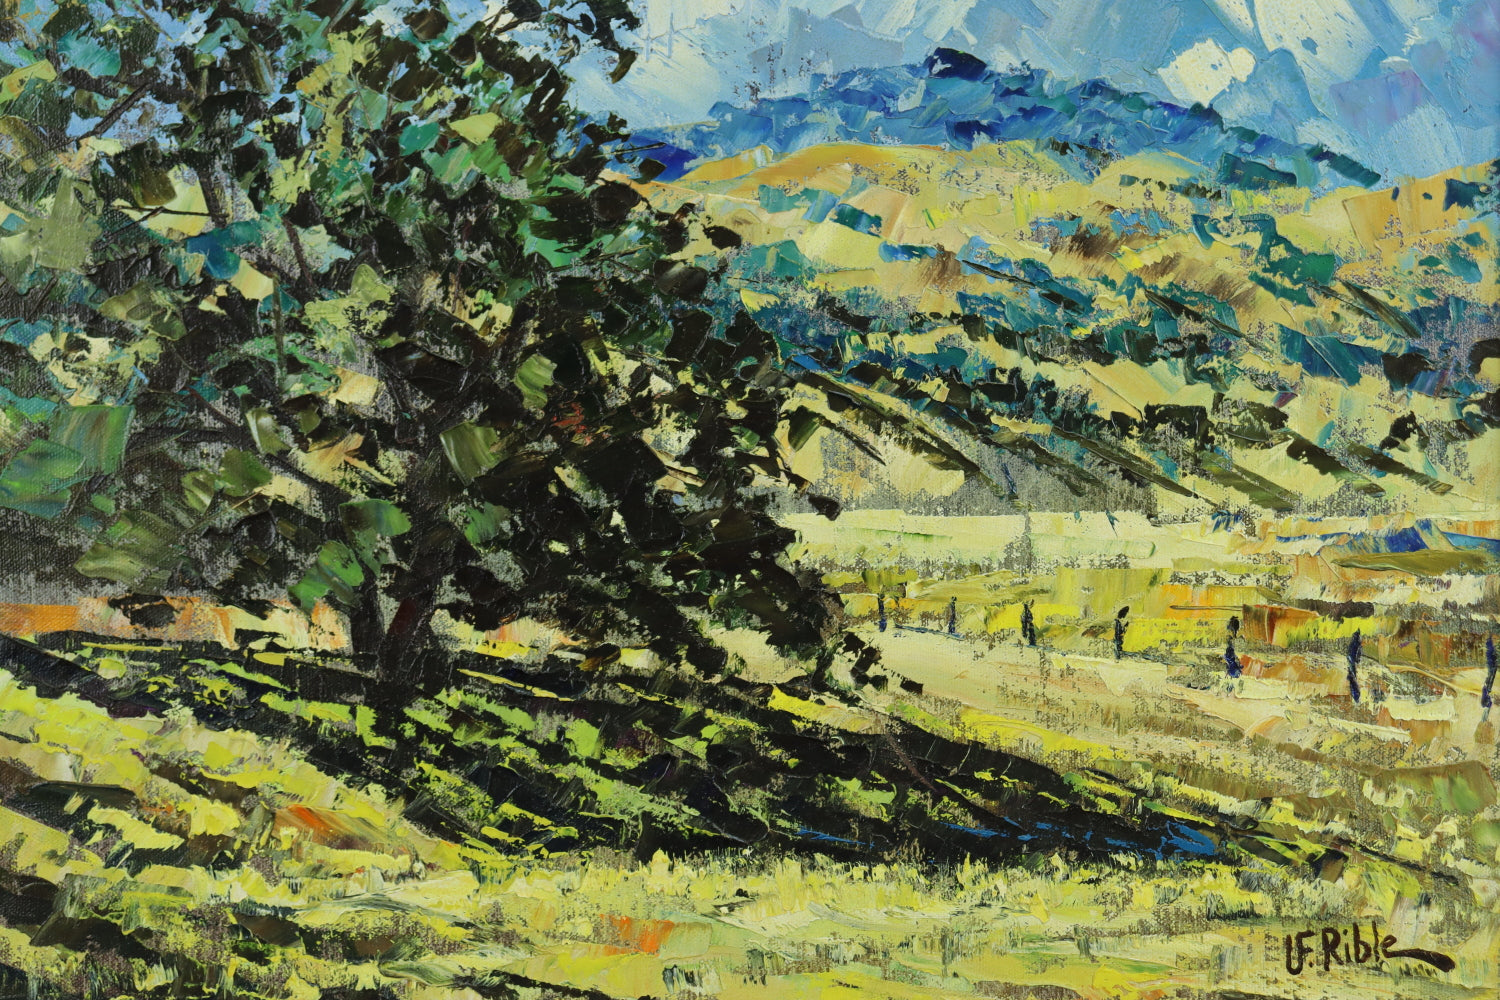 AW403 - Ulysses Floyd Rible - A Morning in Spring - Oil on Canvas